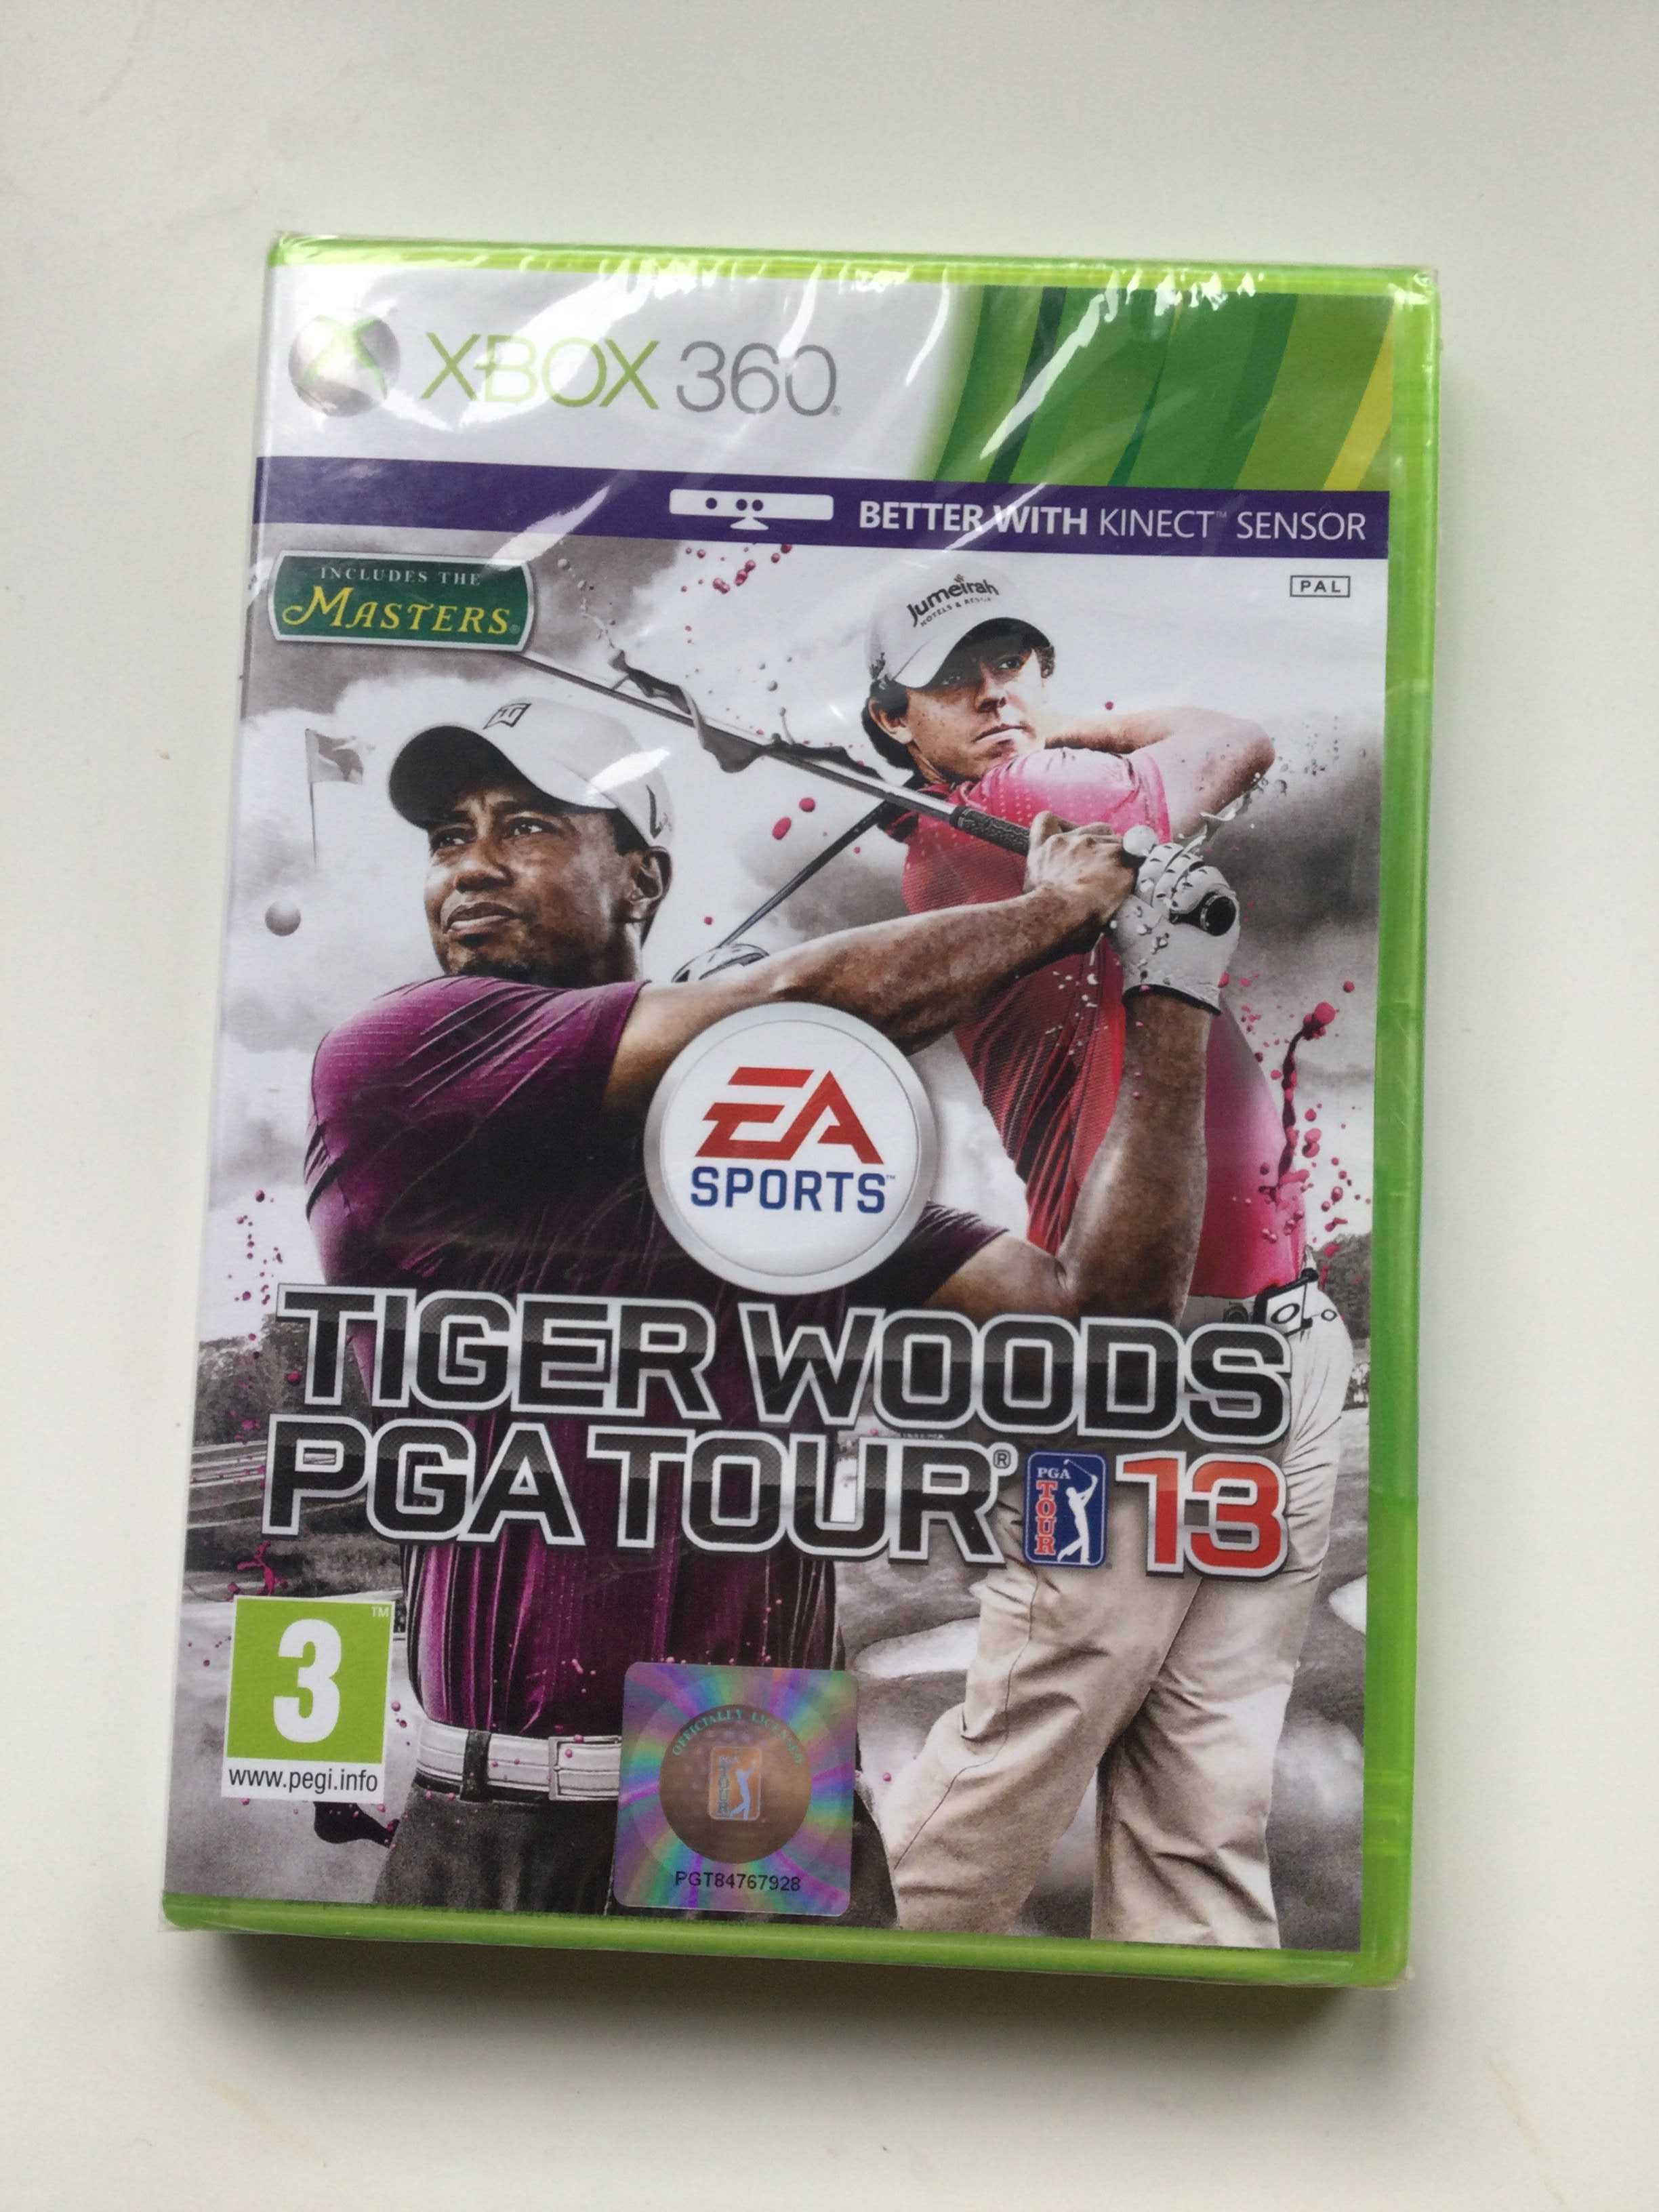 Tiger Woods PGA Tour 13 Xbox 360 Game For Sale